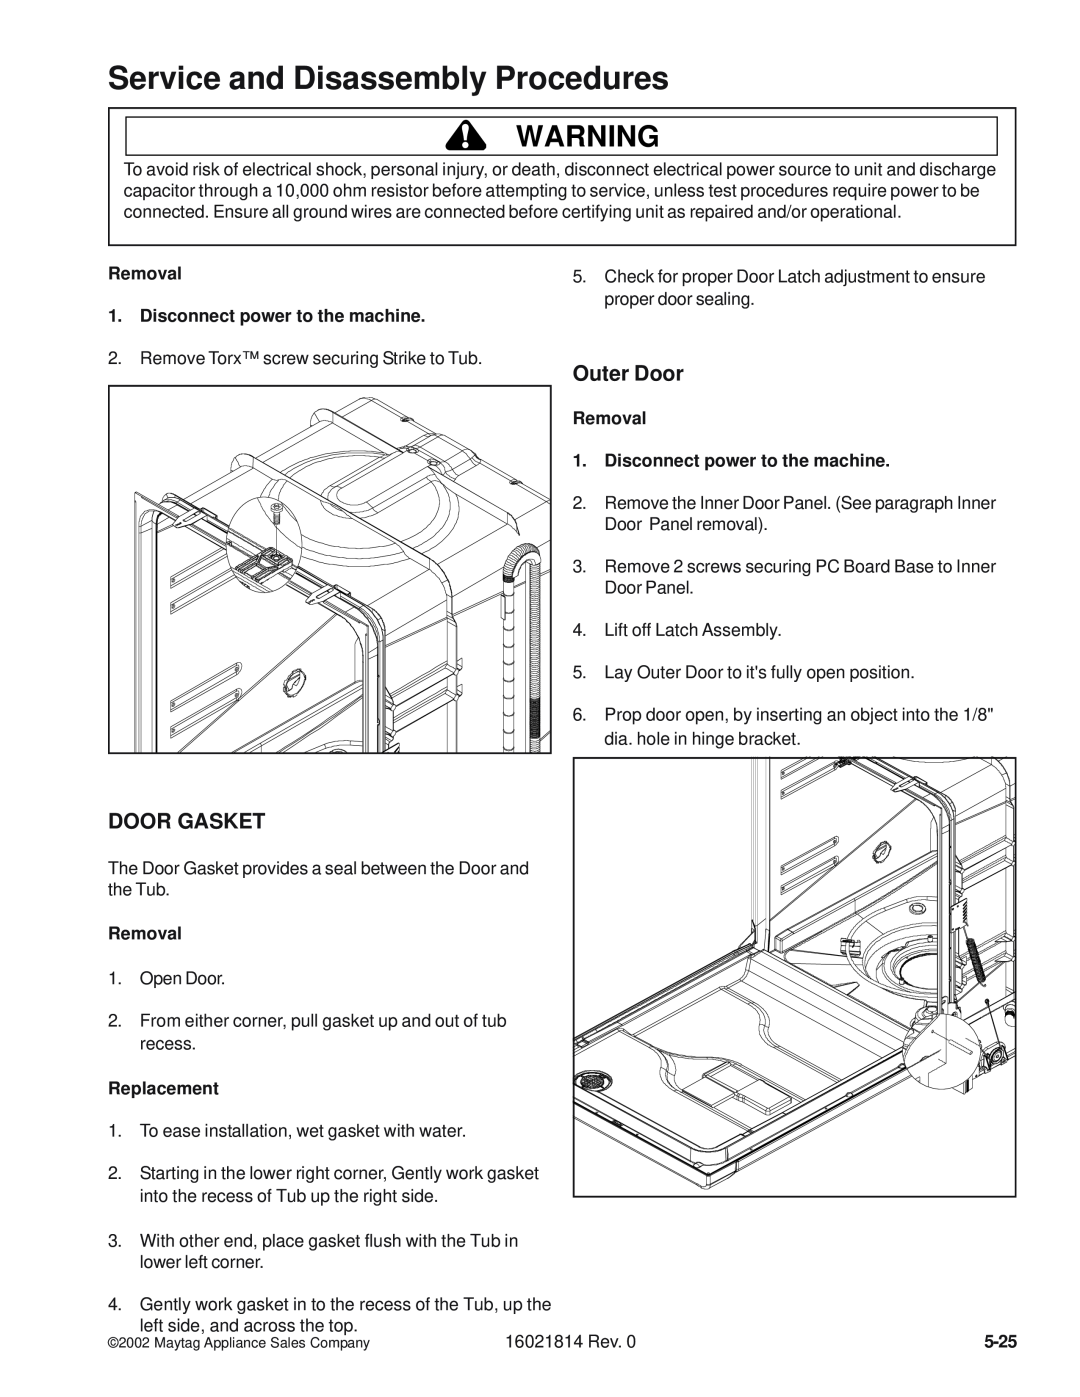 Maytag MDBF750AW Outer Door, Door Gasket, Service and Disassembly Procedures, Removal 1.Disconnect power to the machine 